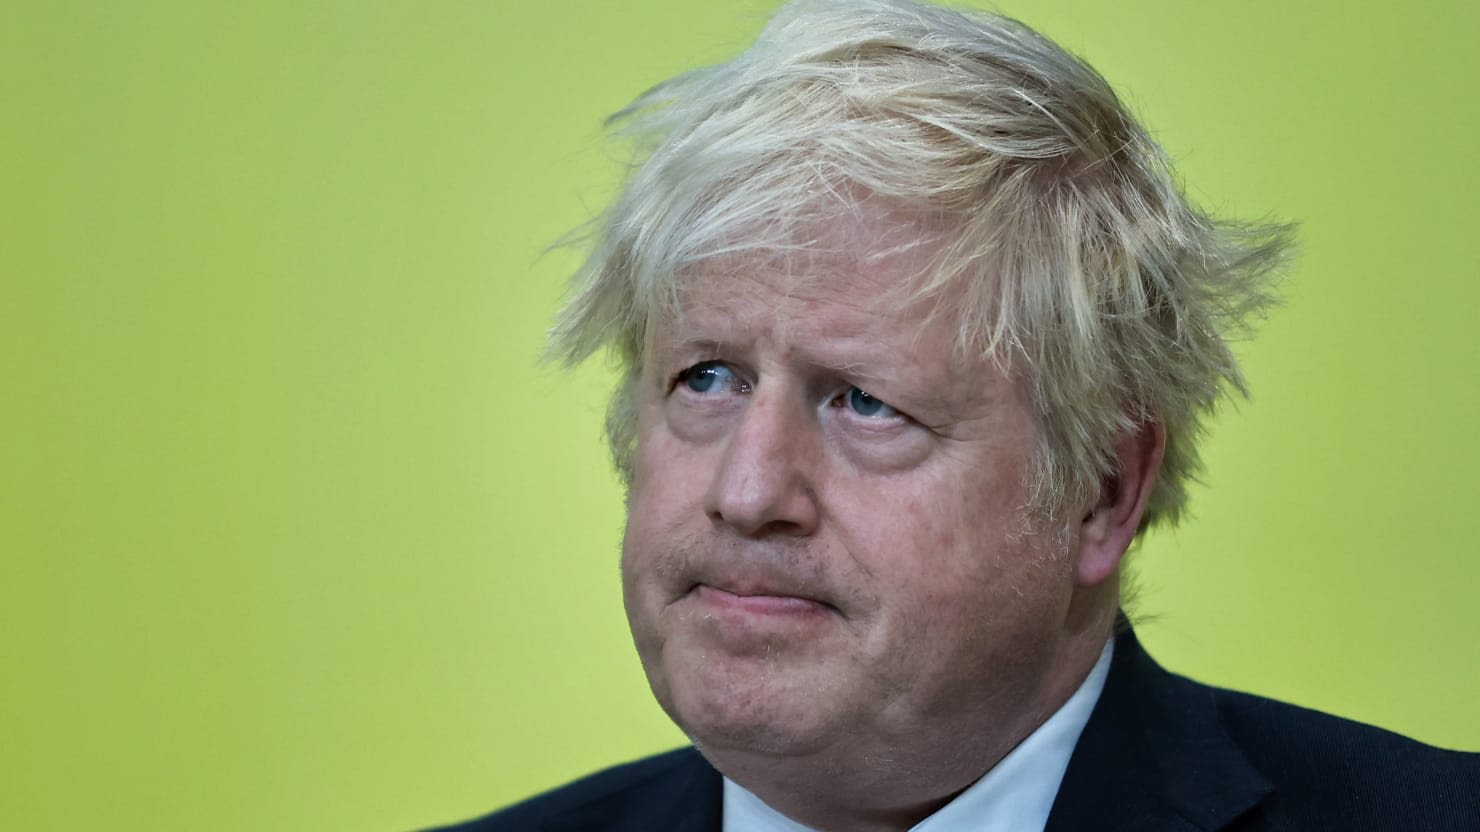 Boris Johnson Turned Away From Polling Station Under Rule He Instituted: Report